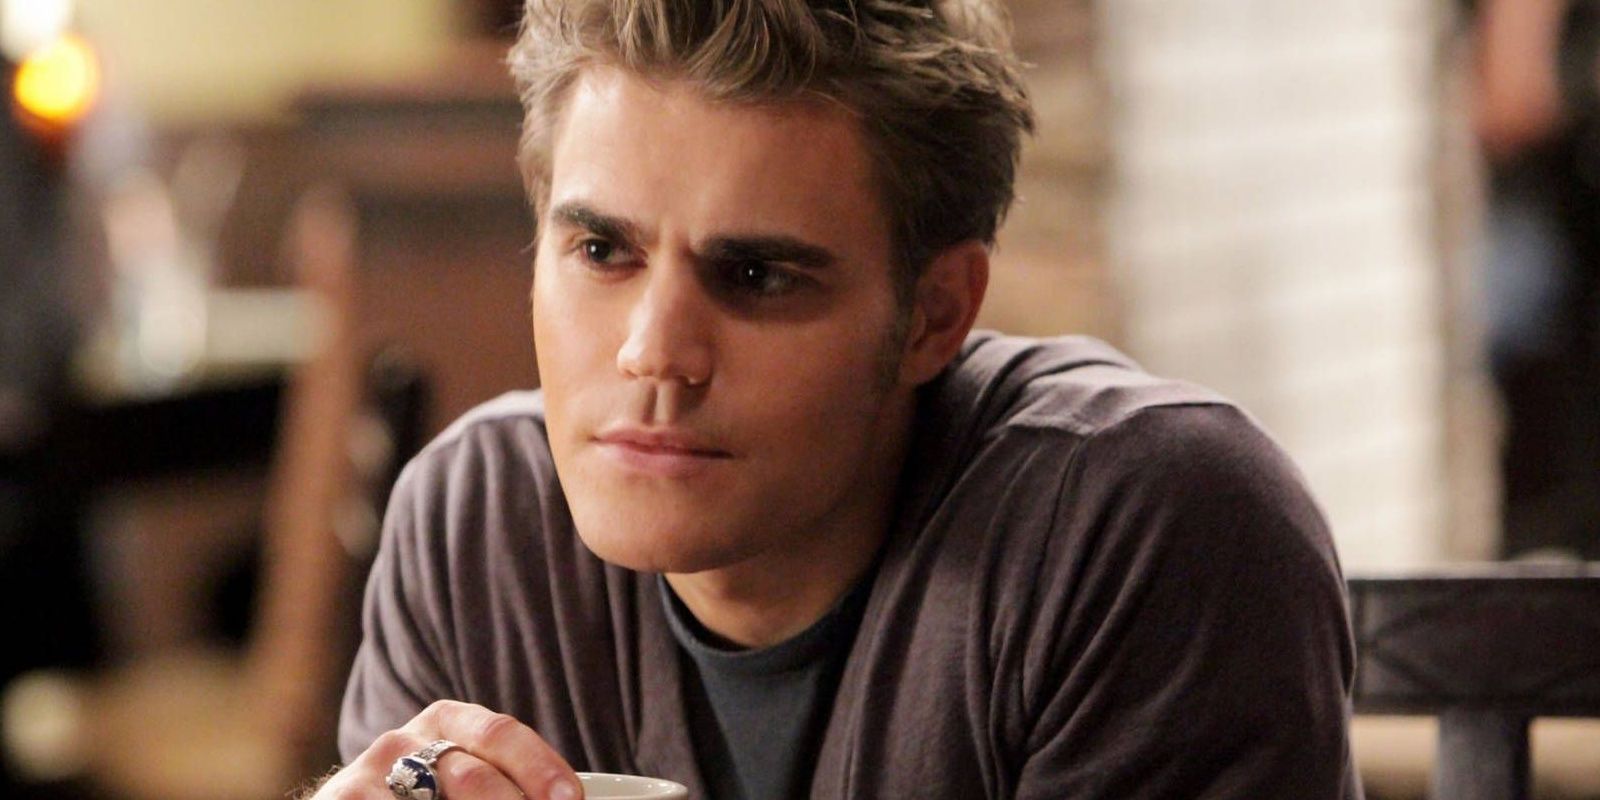 Stefan sitting at the Grill in The Vampire Diaries.